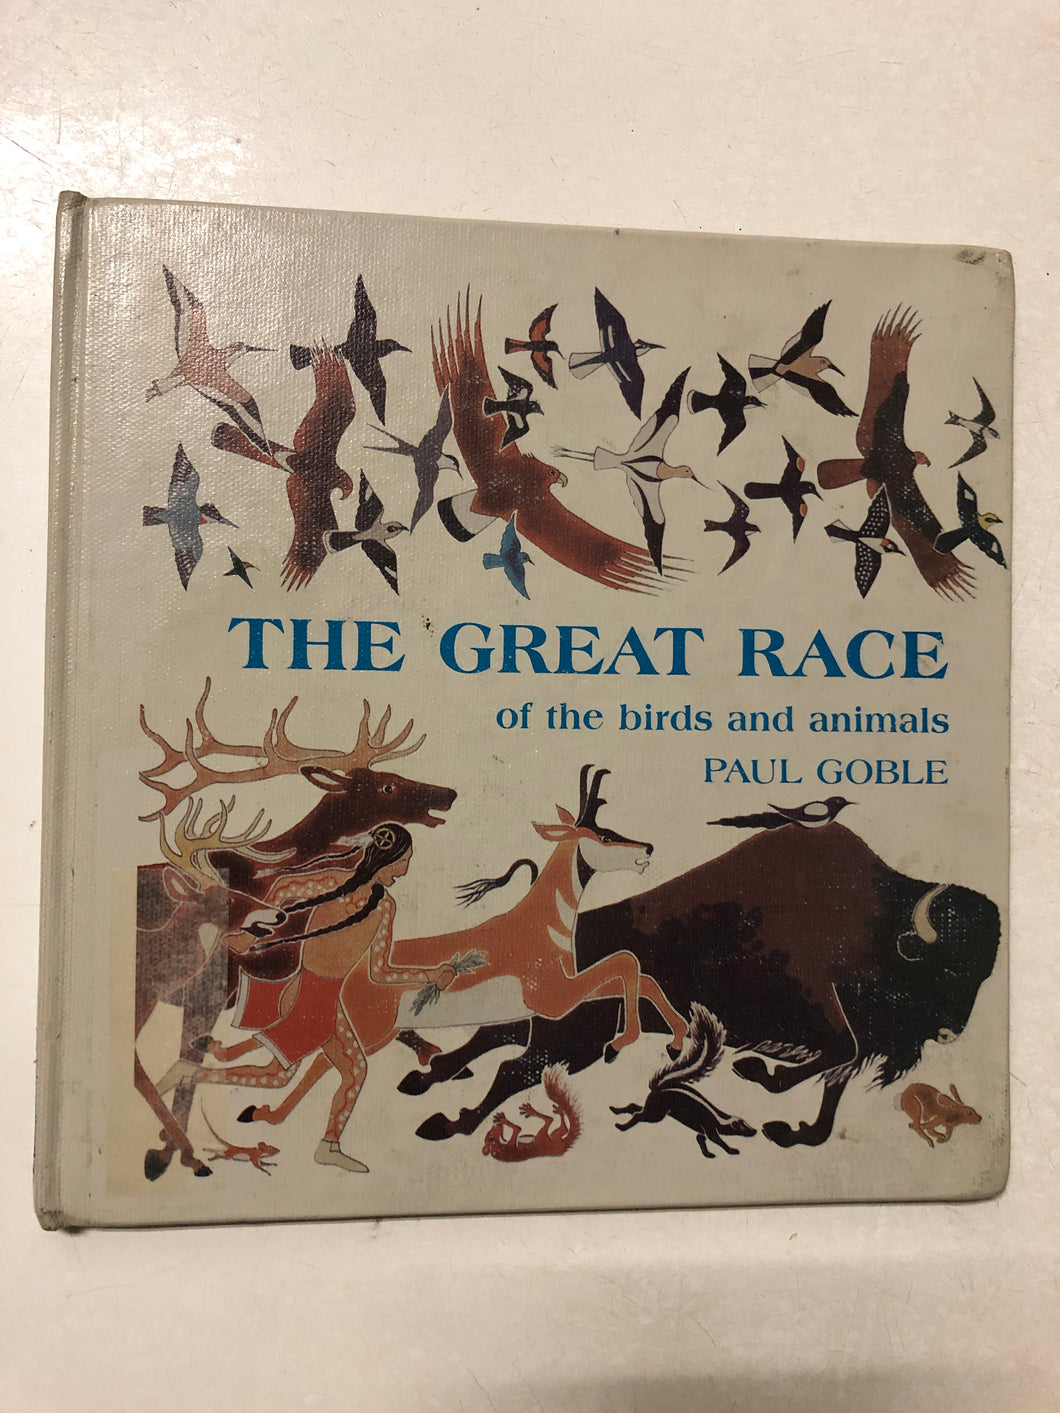 The Great Race of the Birds and Animals - Slick Cat Books 